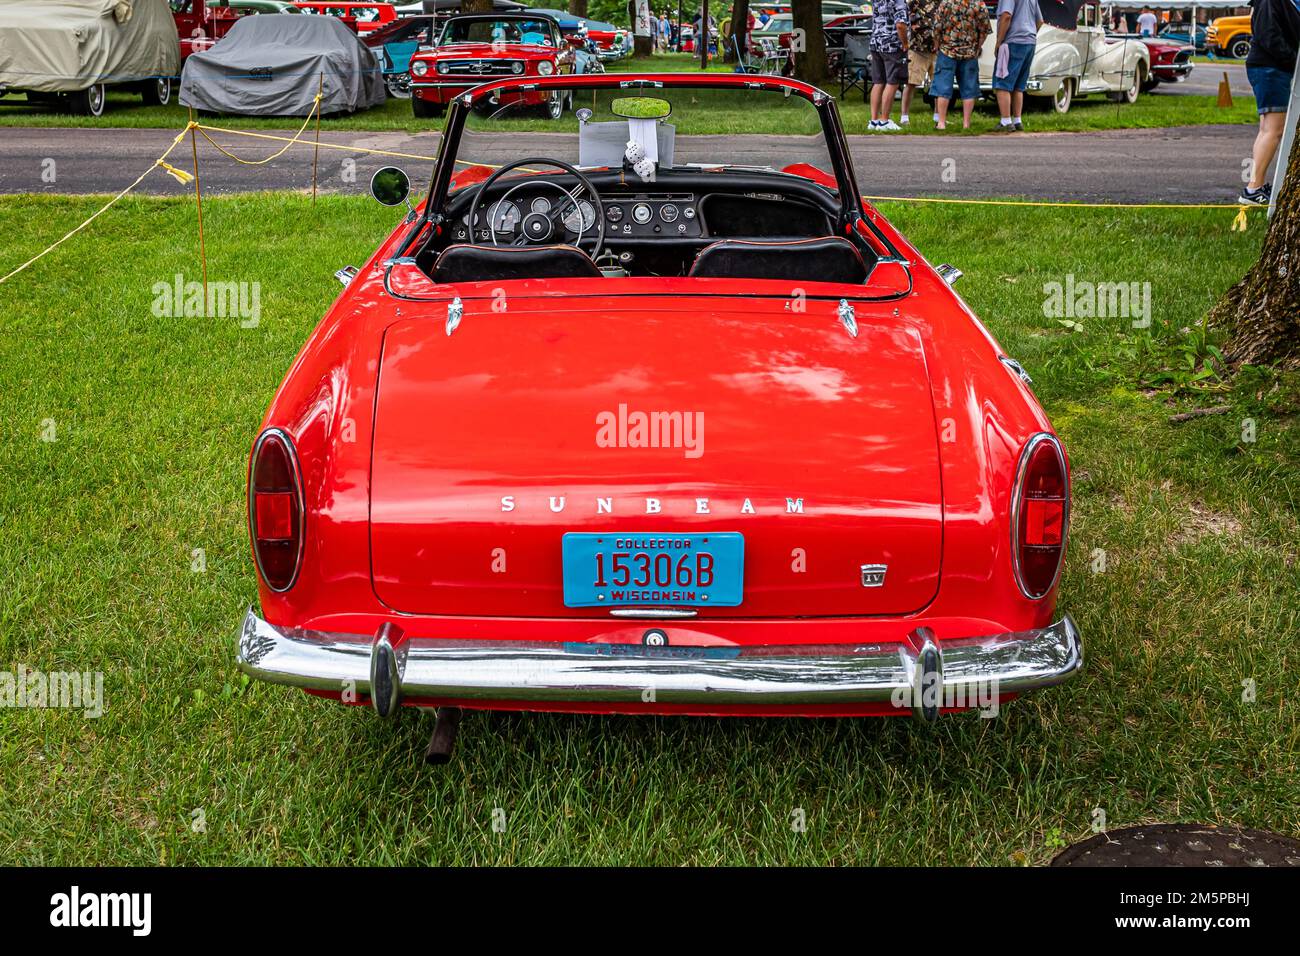 Iola, WI - July 07, 2022: High perspective rear view of a 1965 Sunbeam Alpine MK IV Convertible at a local car show. Stock Photo